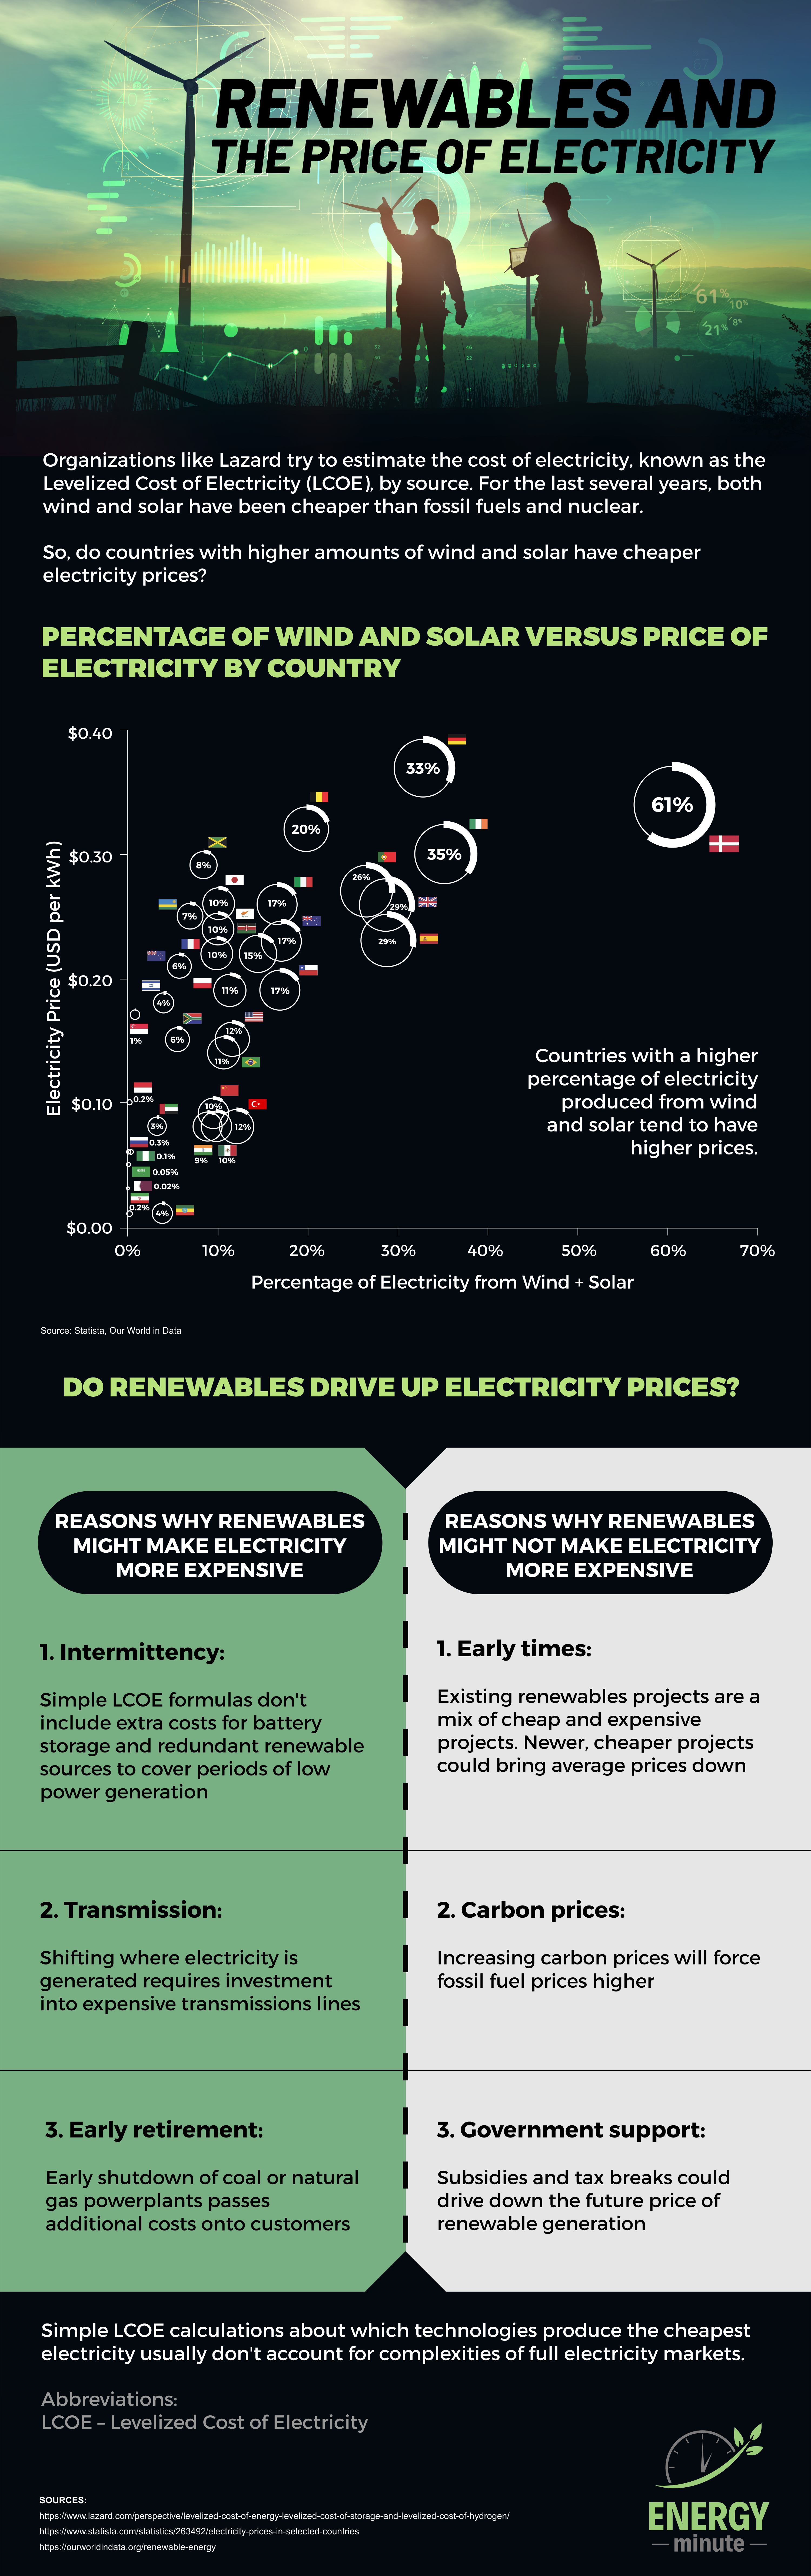 Renewables and the Price of Electricity